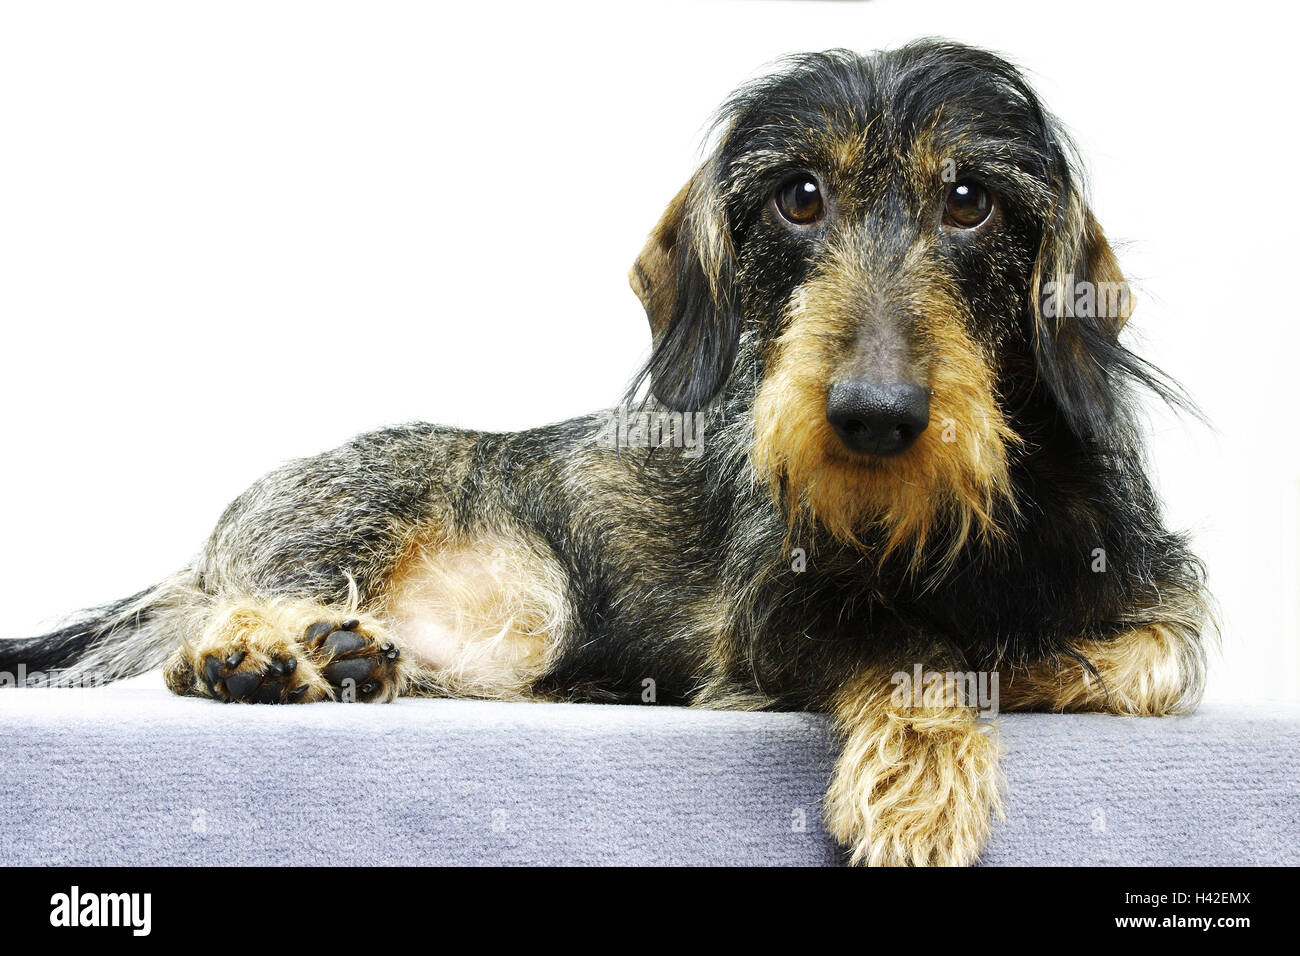 Rauhaardackel High Resolution Stock Photography and Images - Alamy